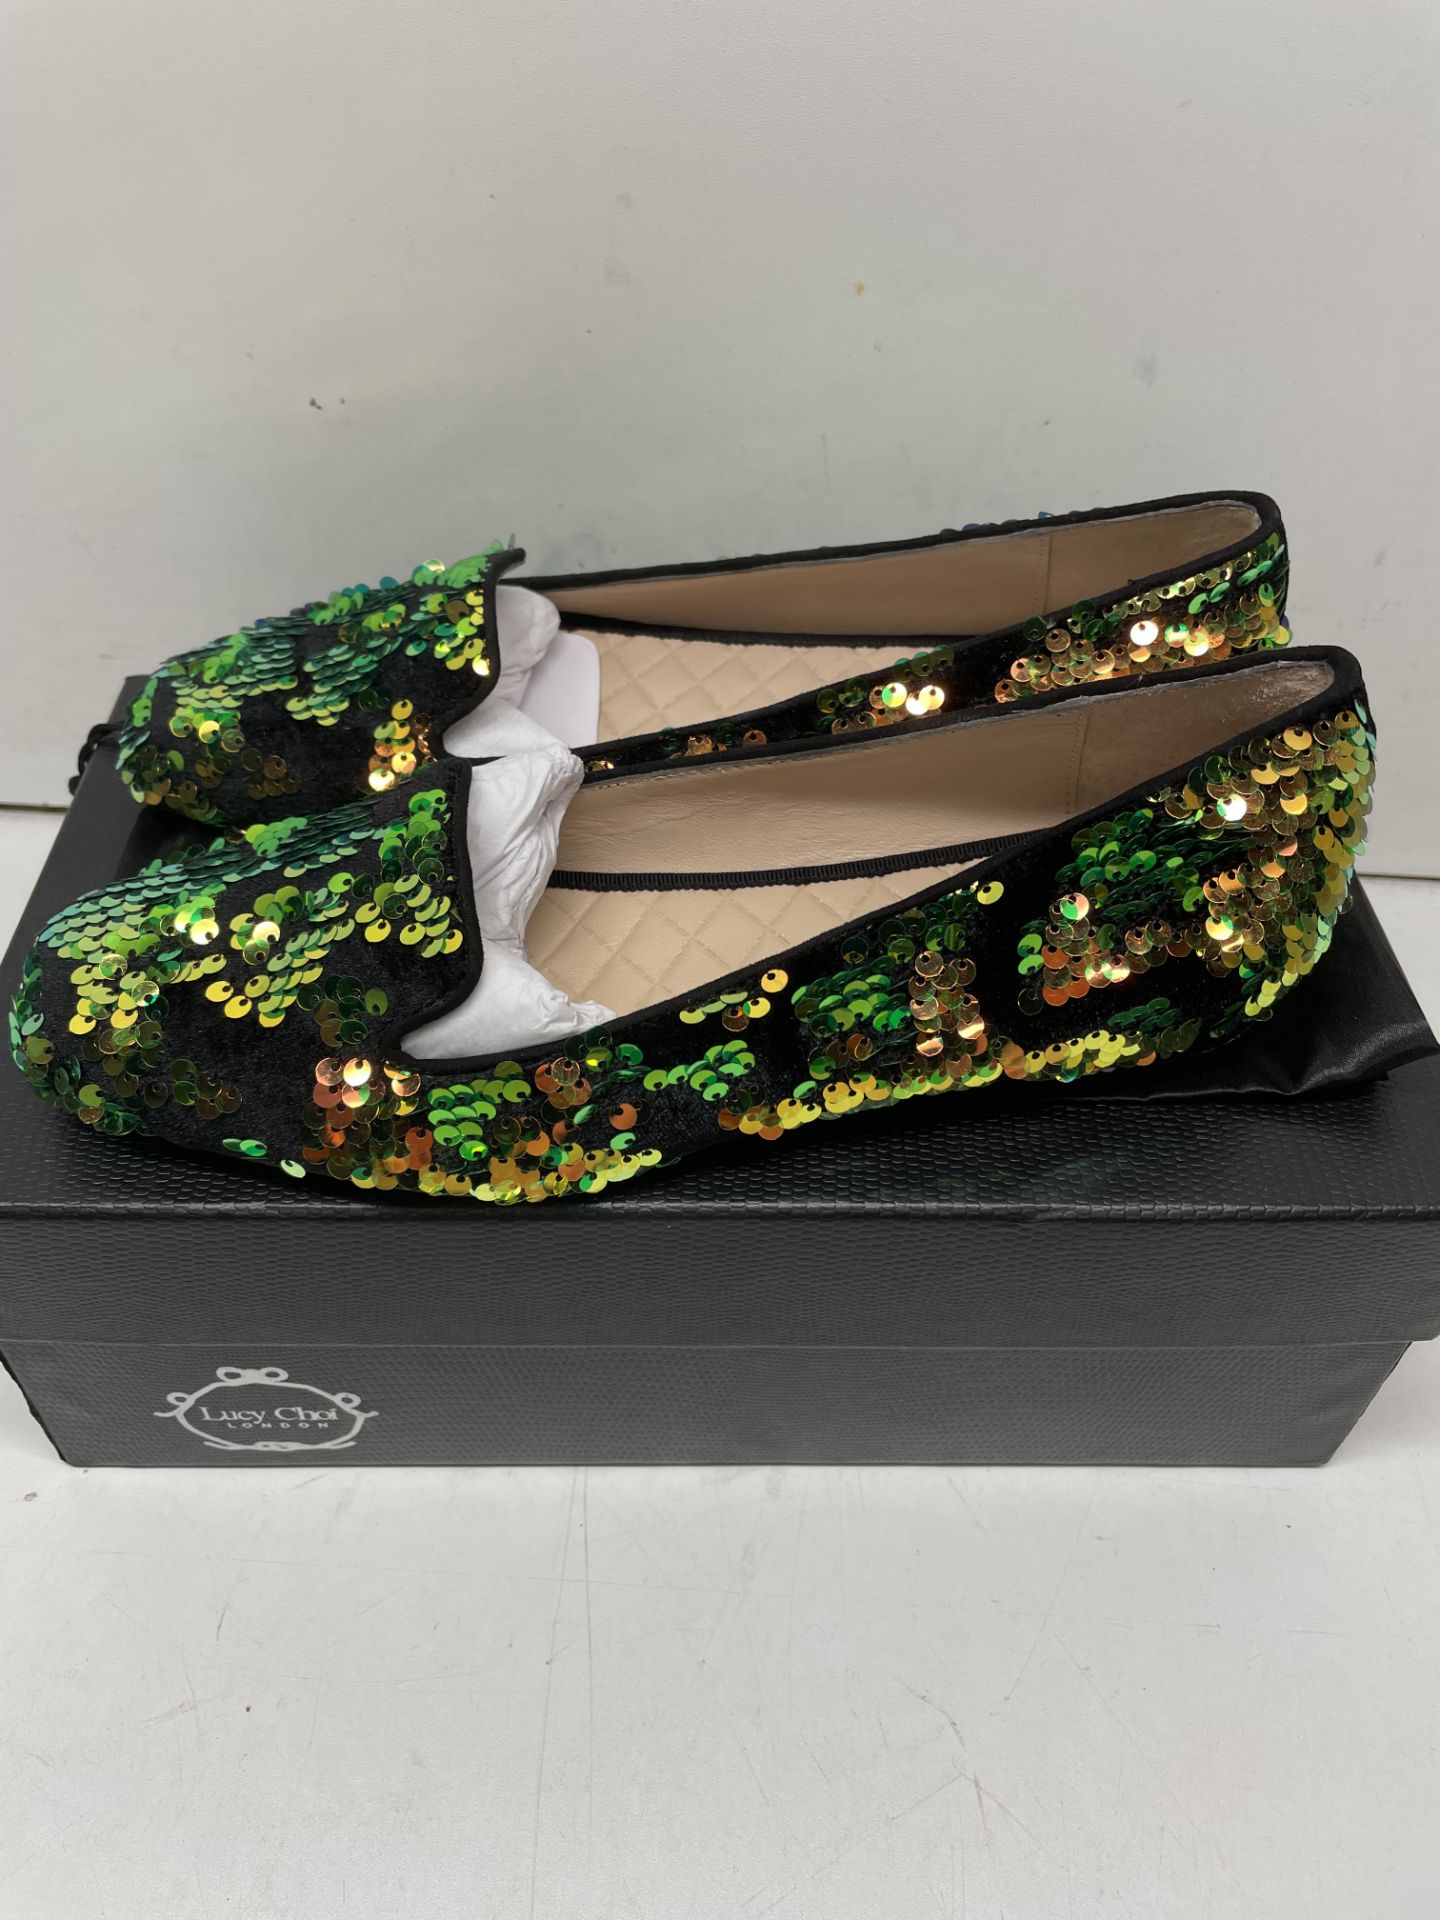 Ex-Display Lucy Choi Loafers | Eur 36 - Image 2 of 5